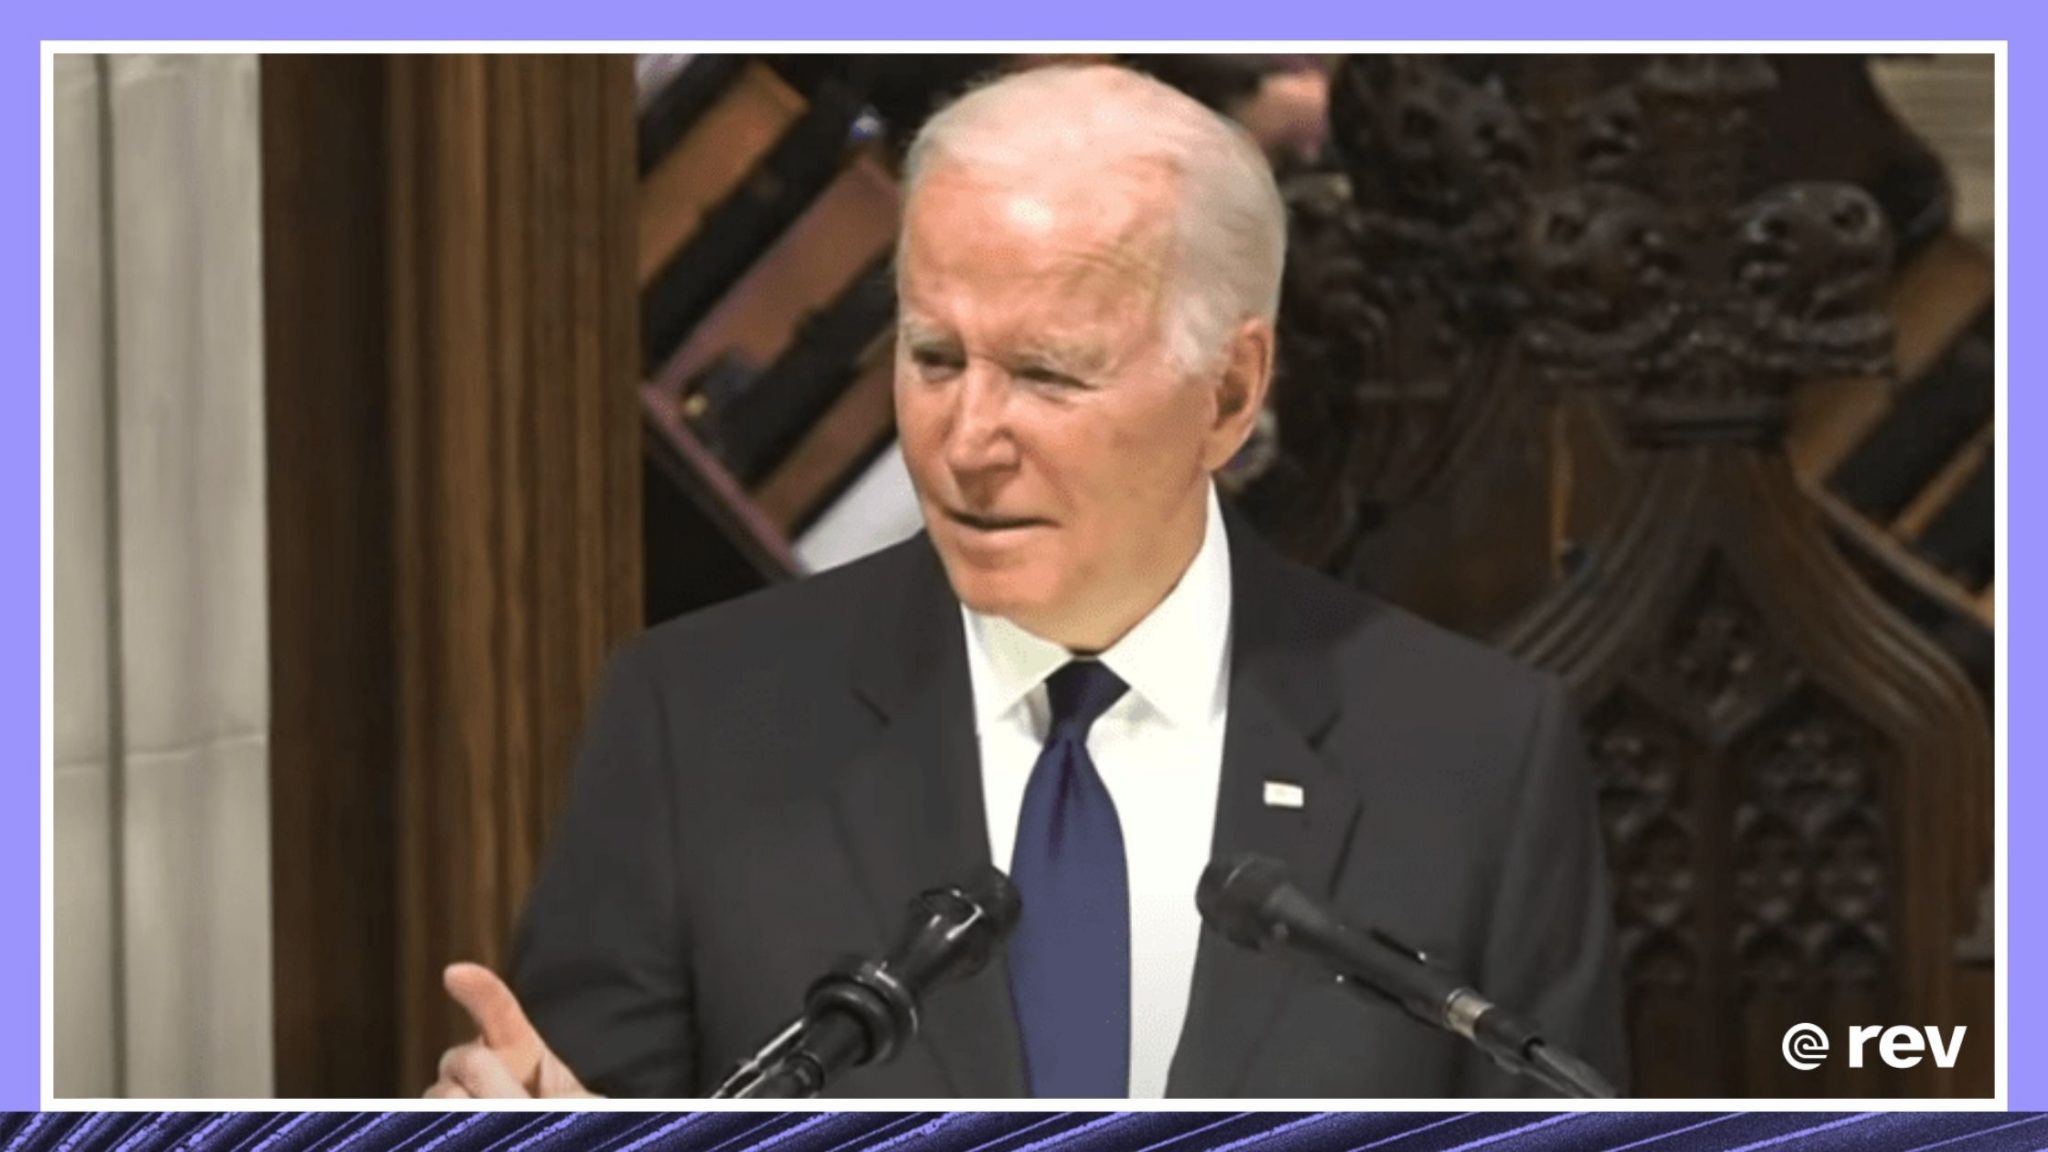 Madeleine Albright was ‘a force for good in the world,’ Biden says in eulogy 4/27/22 Transcript